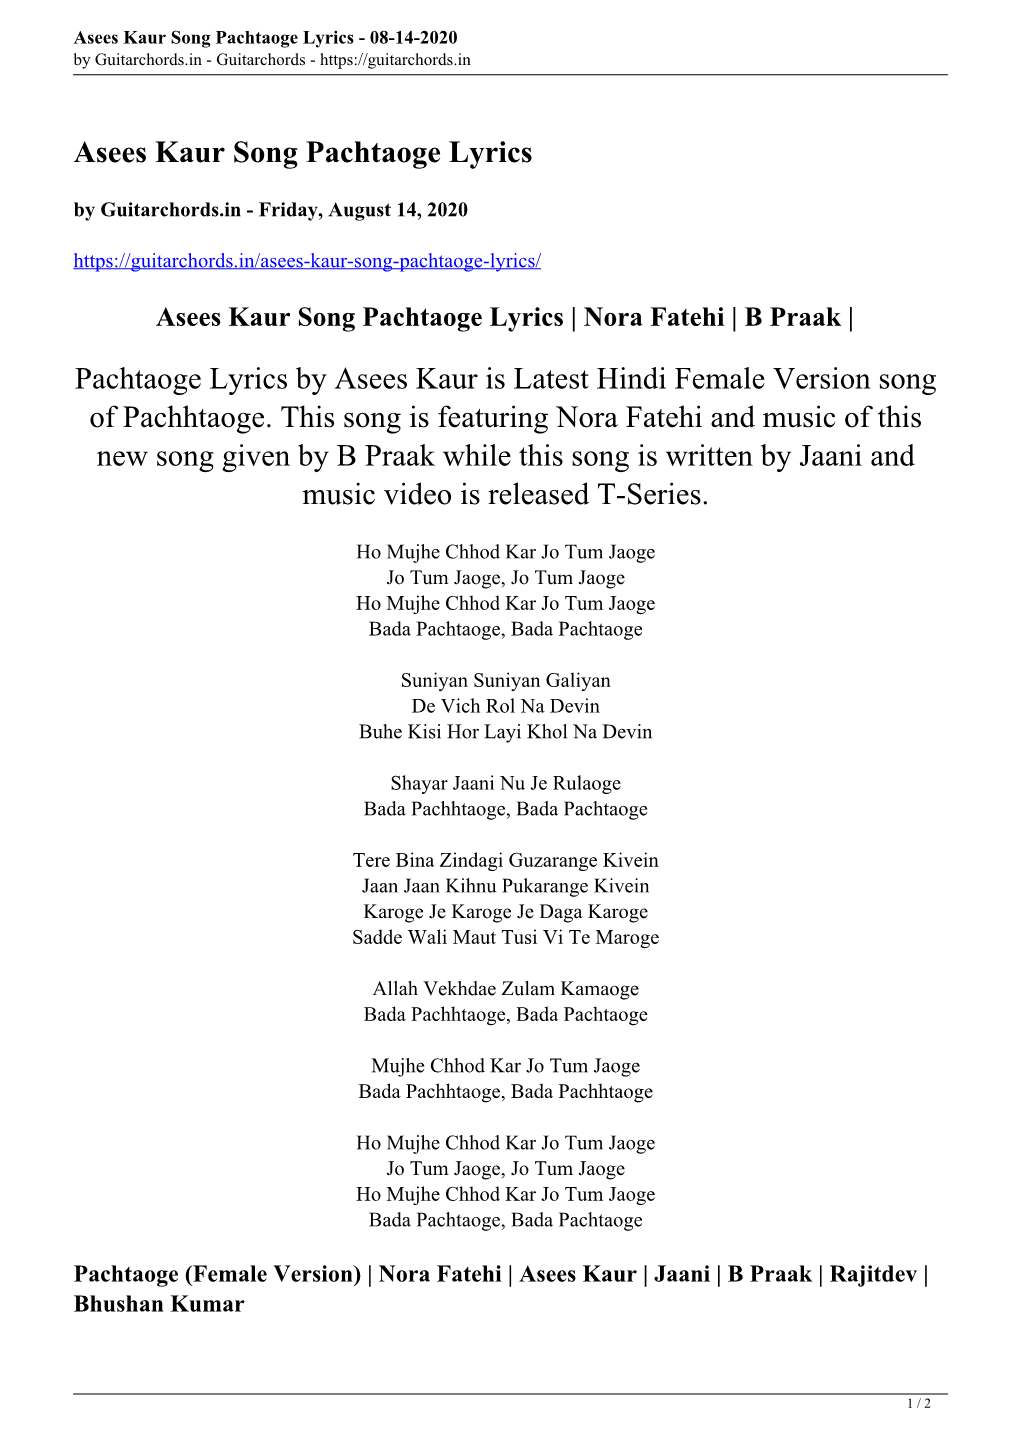 Asees Kaur Song Pachtaoge Lyrics - 08-14-2020 by Guitarchords.In - Guitarchords